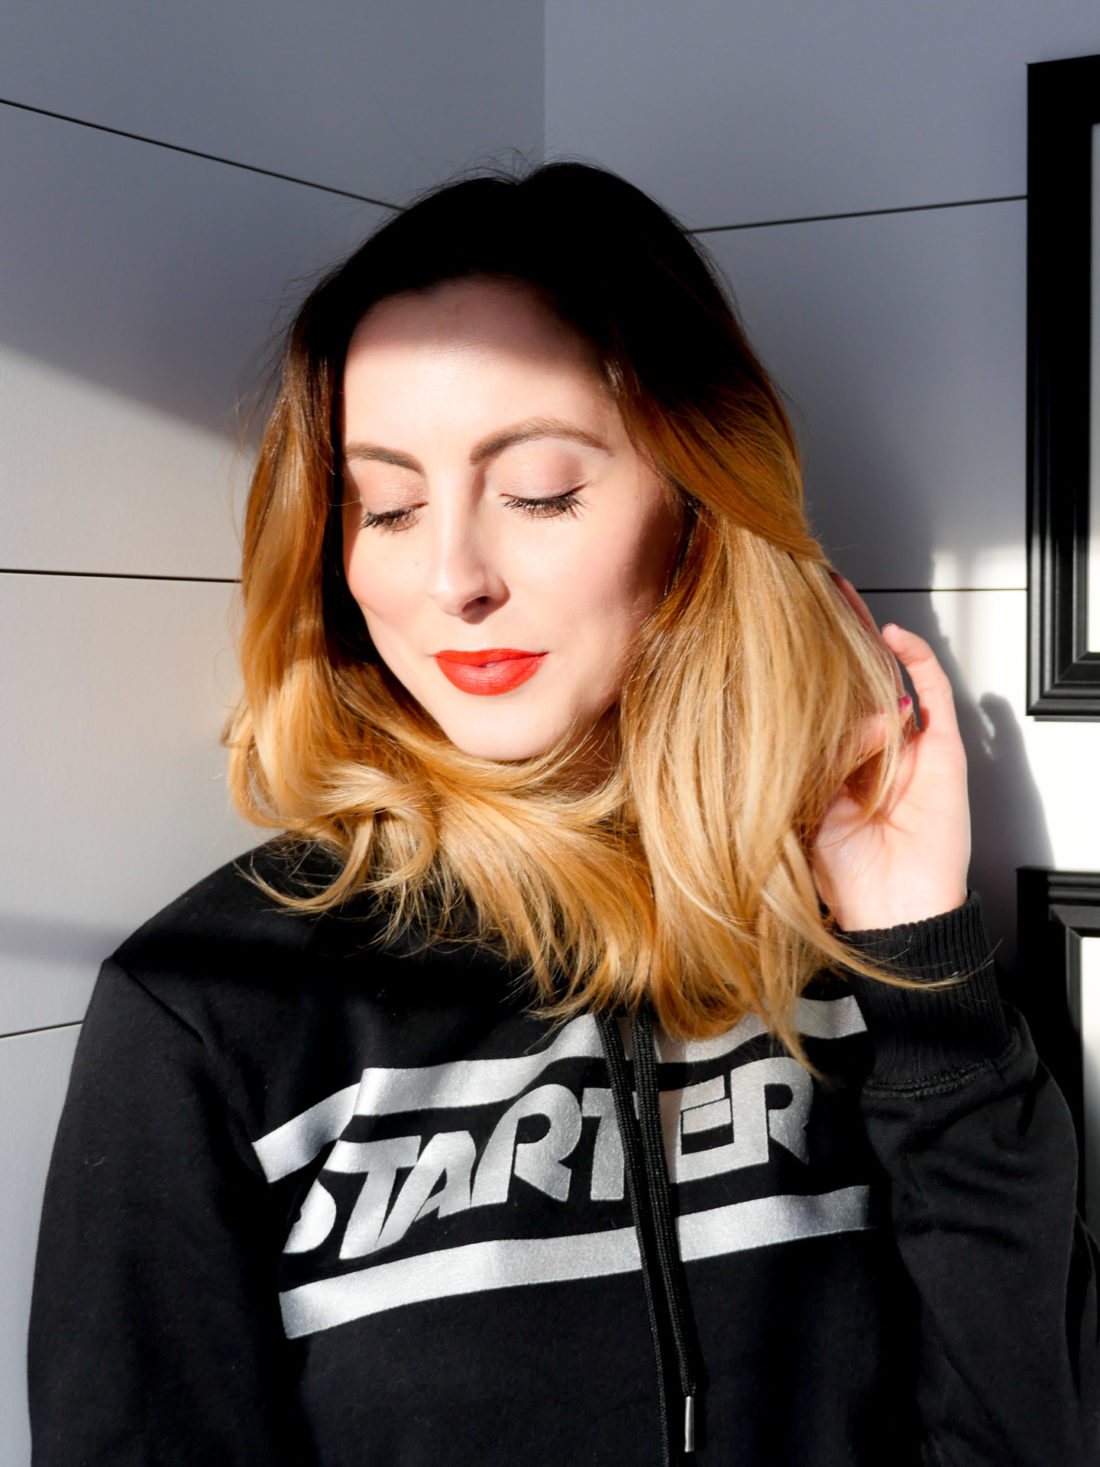 Eva Amurri Martino wears a Starter hoodie with red lipstick and stand in a beam of sunlight